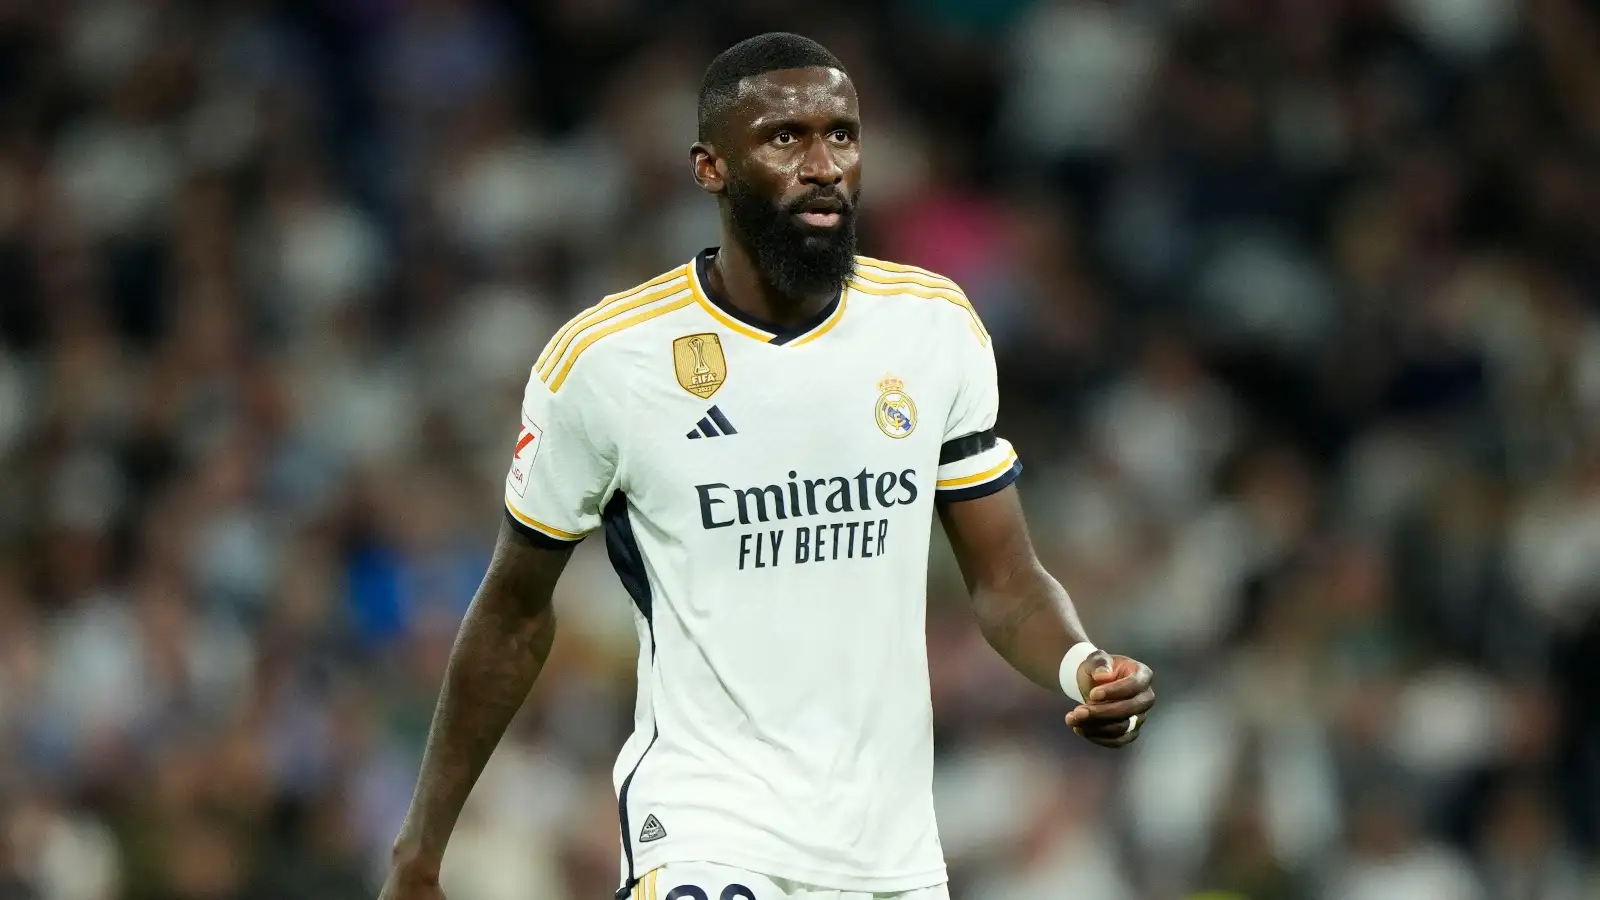 We’re delighted to announce that Antonio Rudiger is still very, very strange